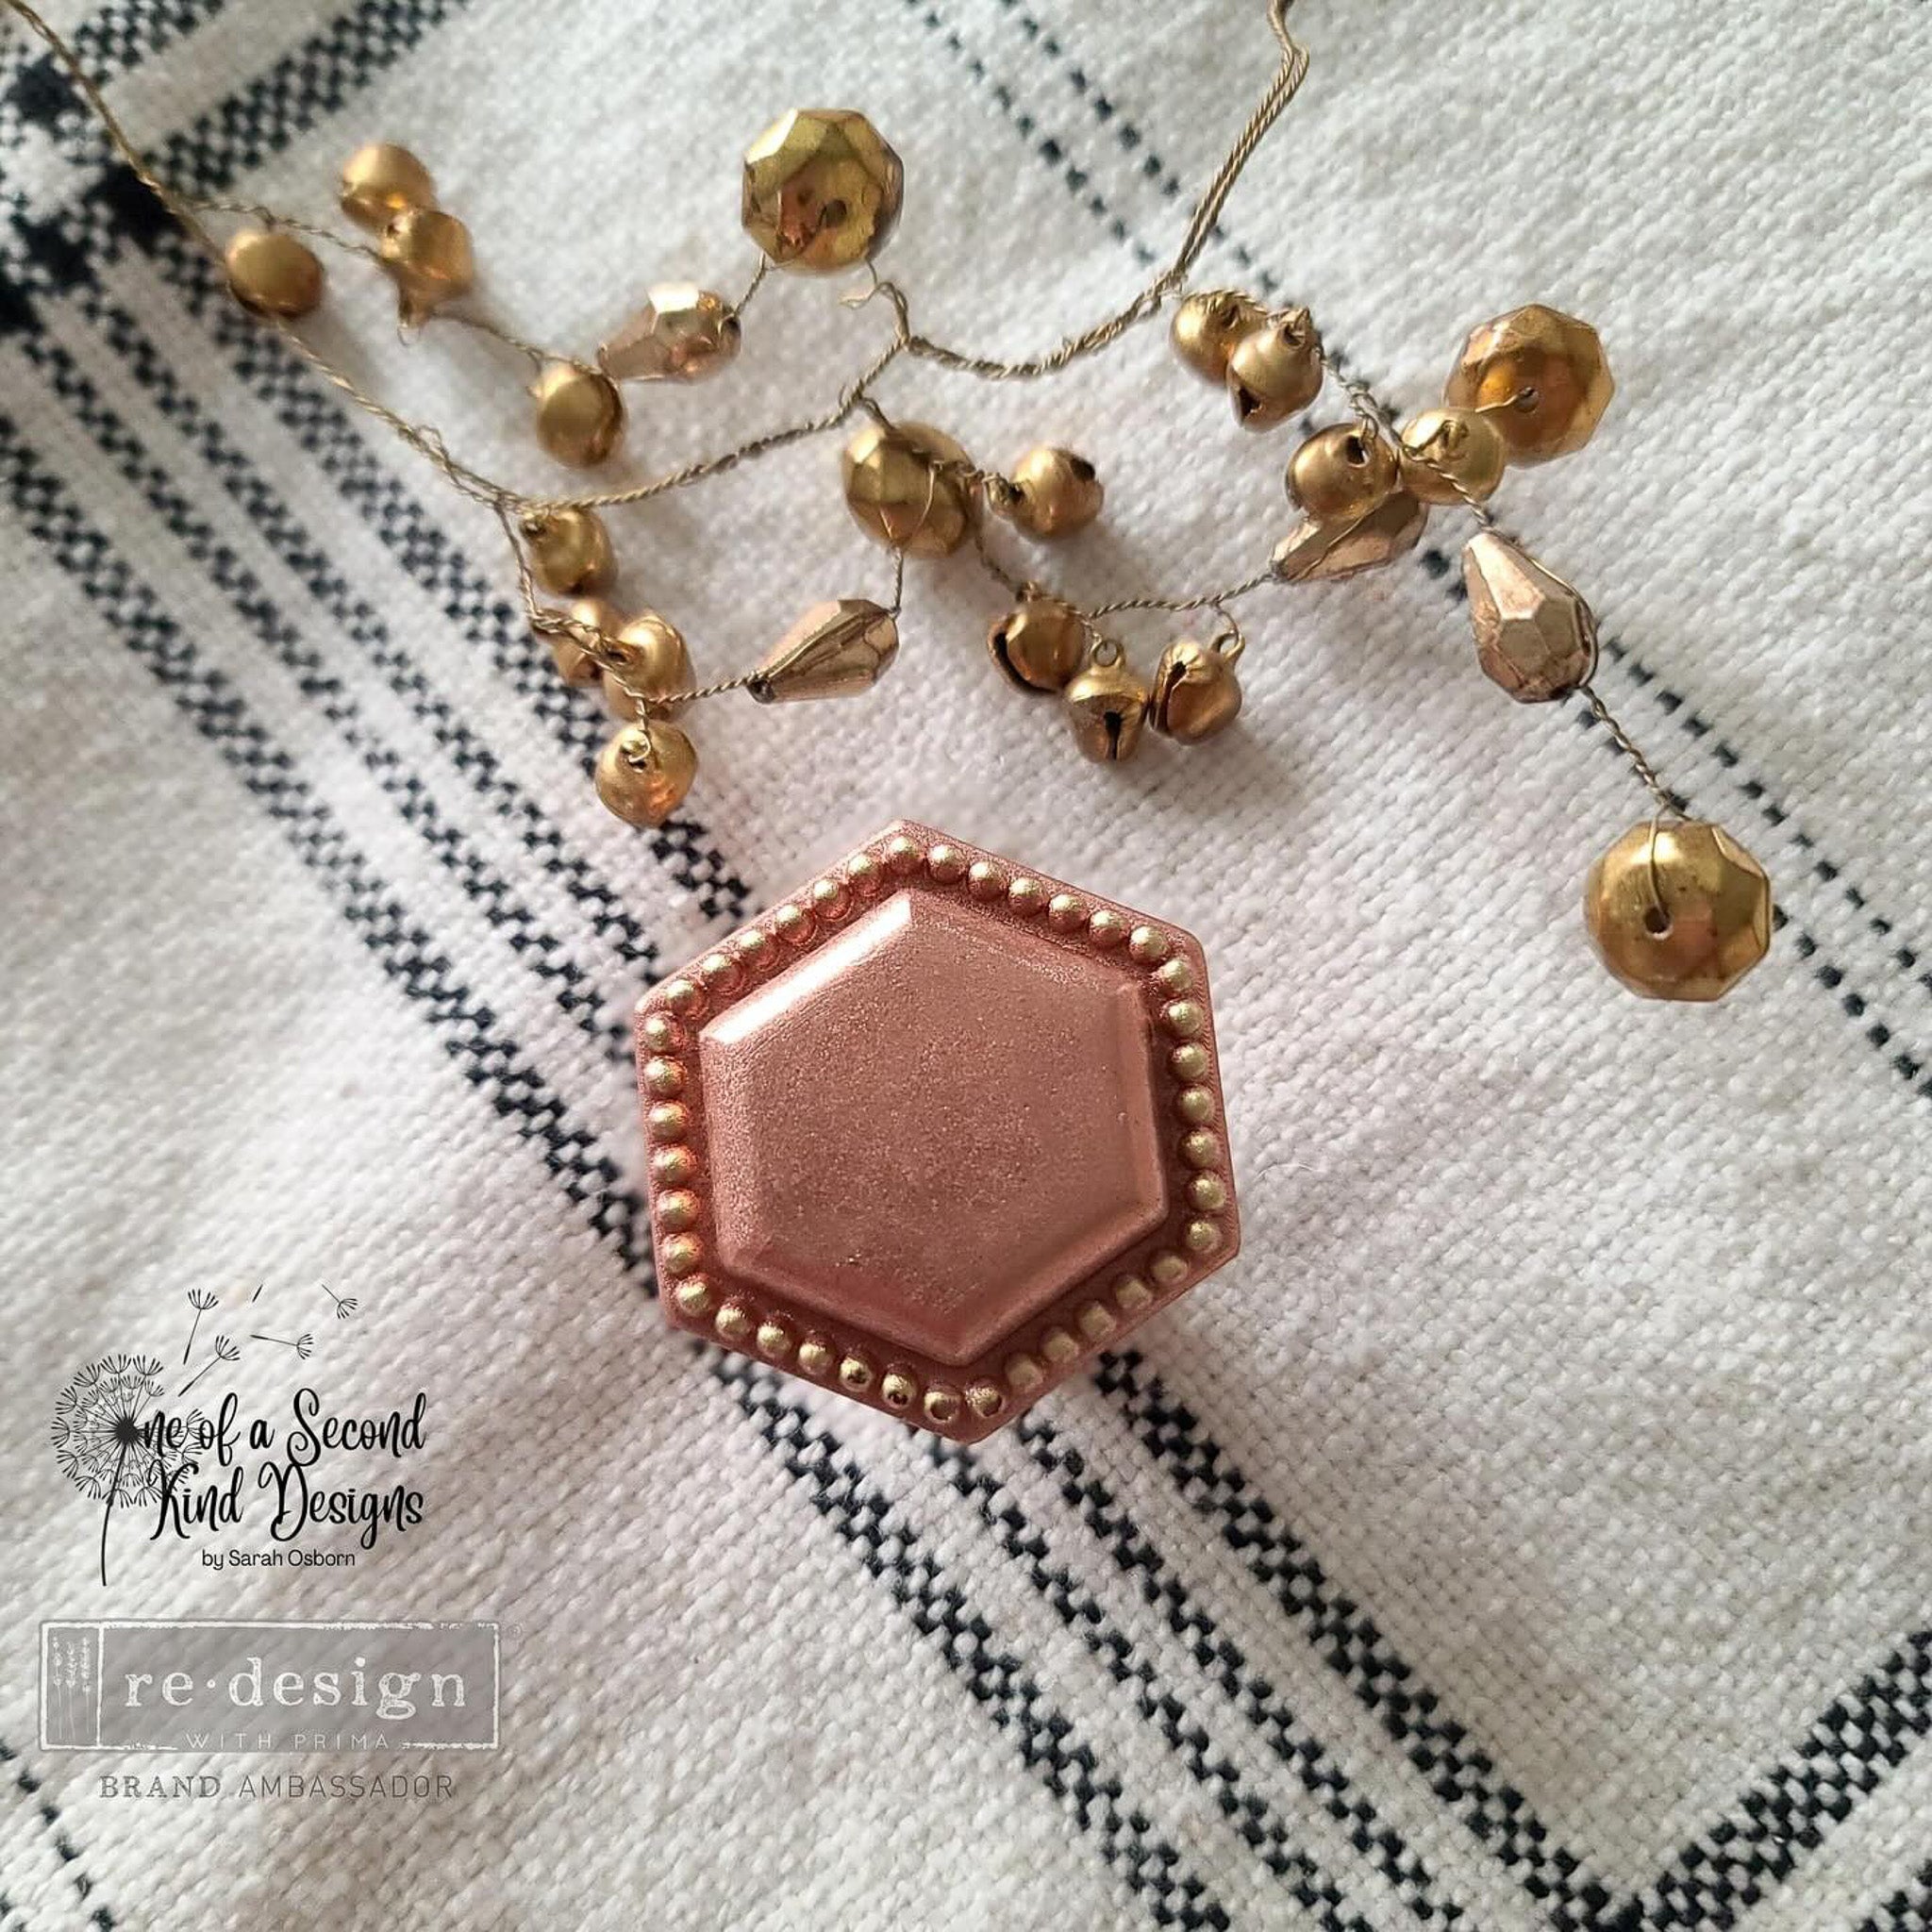 A rose gold colored, pearl-edged, hexagon-shaped silicone mold casting using ReDesign with Prima's Imperial Pearl 3D Knob mold created by One of a Second Kind Designs is sitting on a white napkin with black plaid. Small gold jingle bells on wire are above the knob.